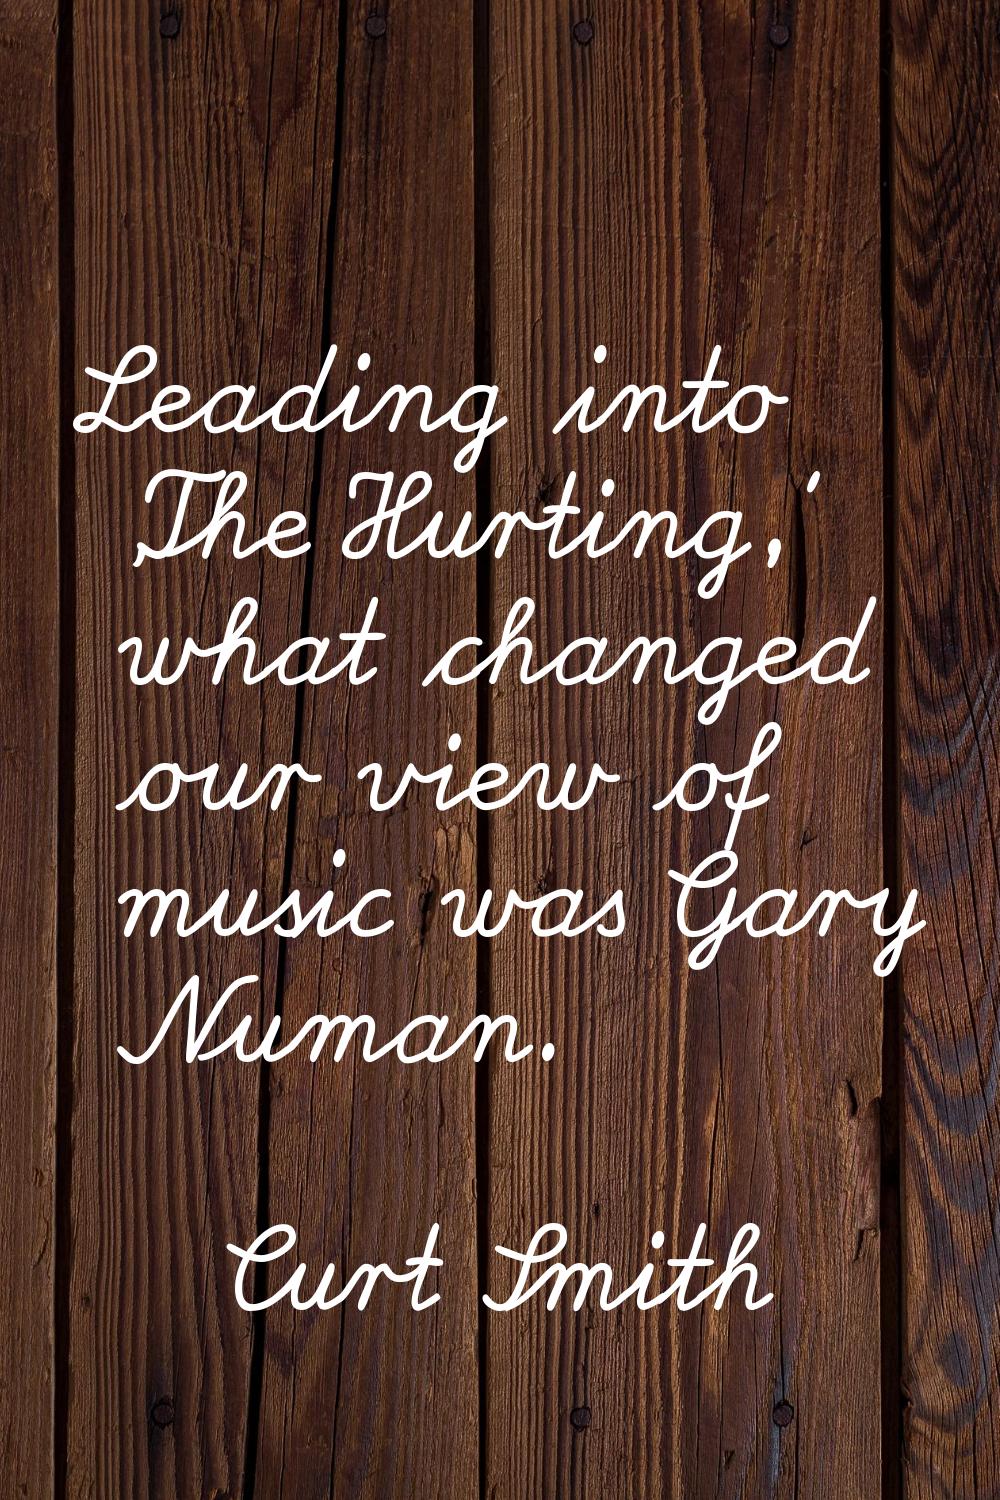 Leading into 'The Hurting,' what changed our view of music was Gary Numan.